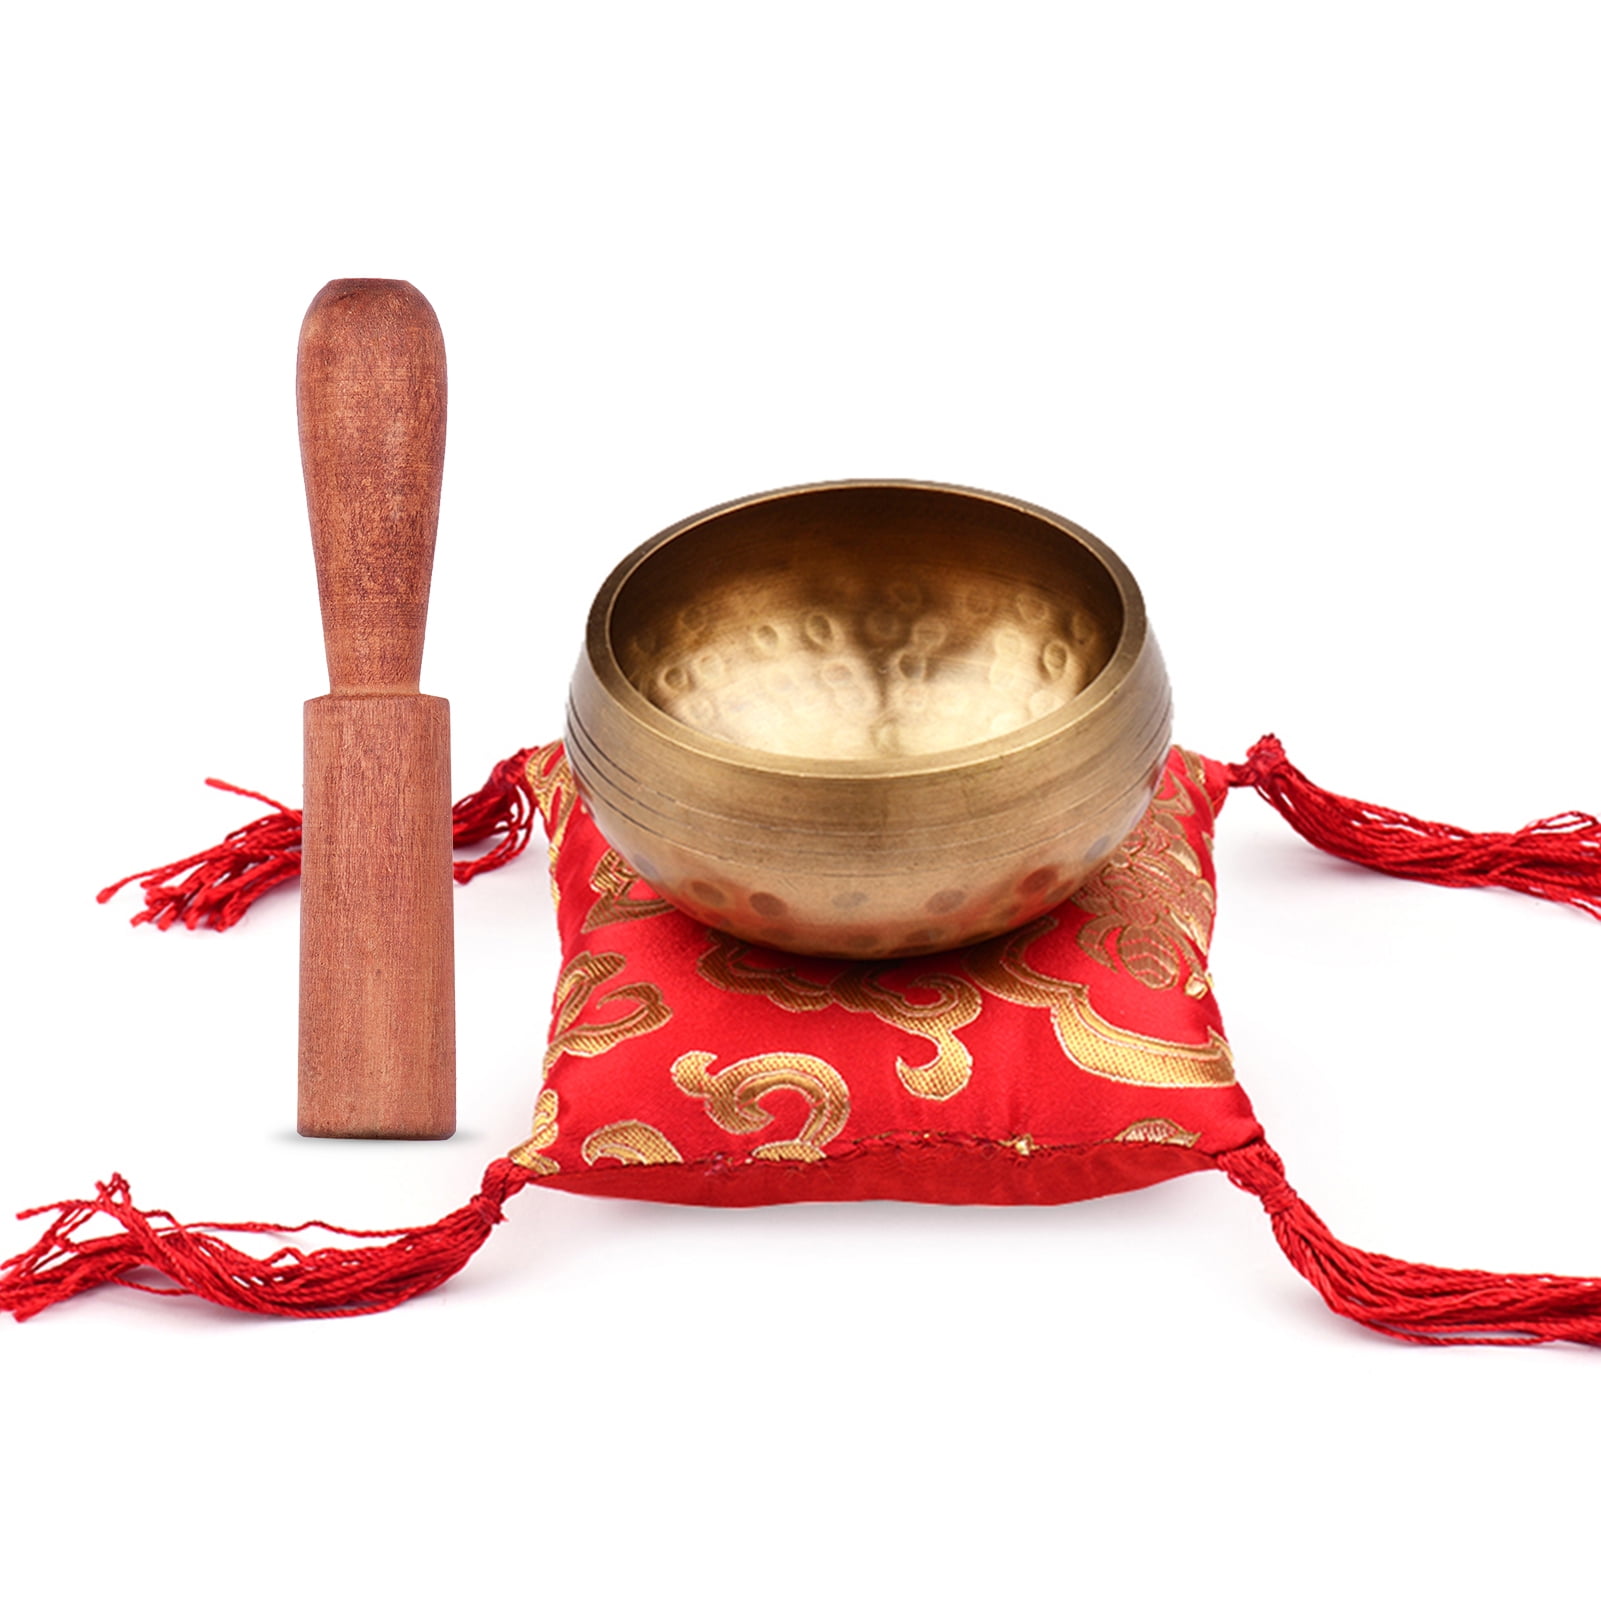 Ajuny Black Buddhist Singing Bowl Hand Painted Comes Stick And Cushion Ideal For Meditations And Sound Healing 4 Inch 